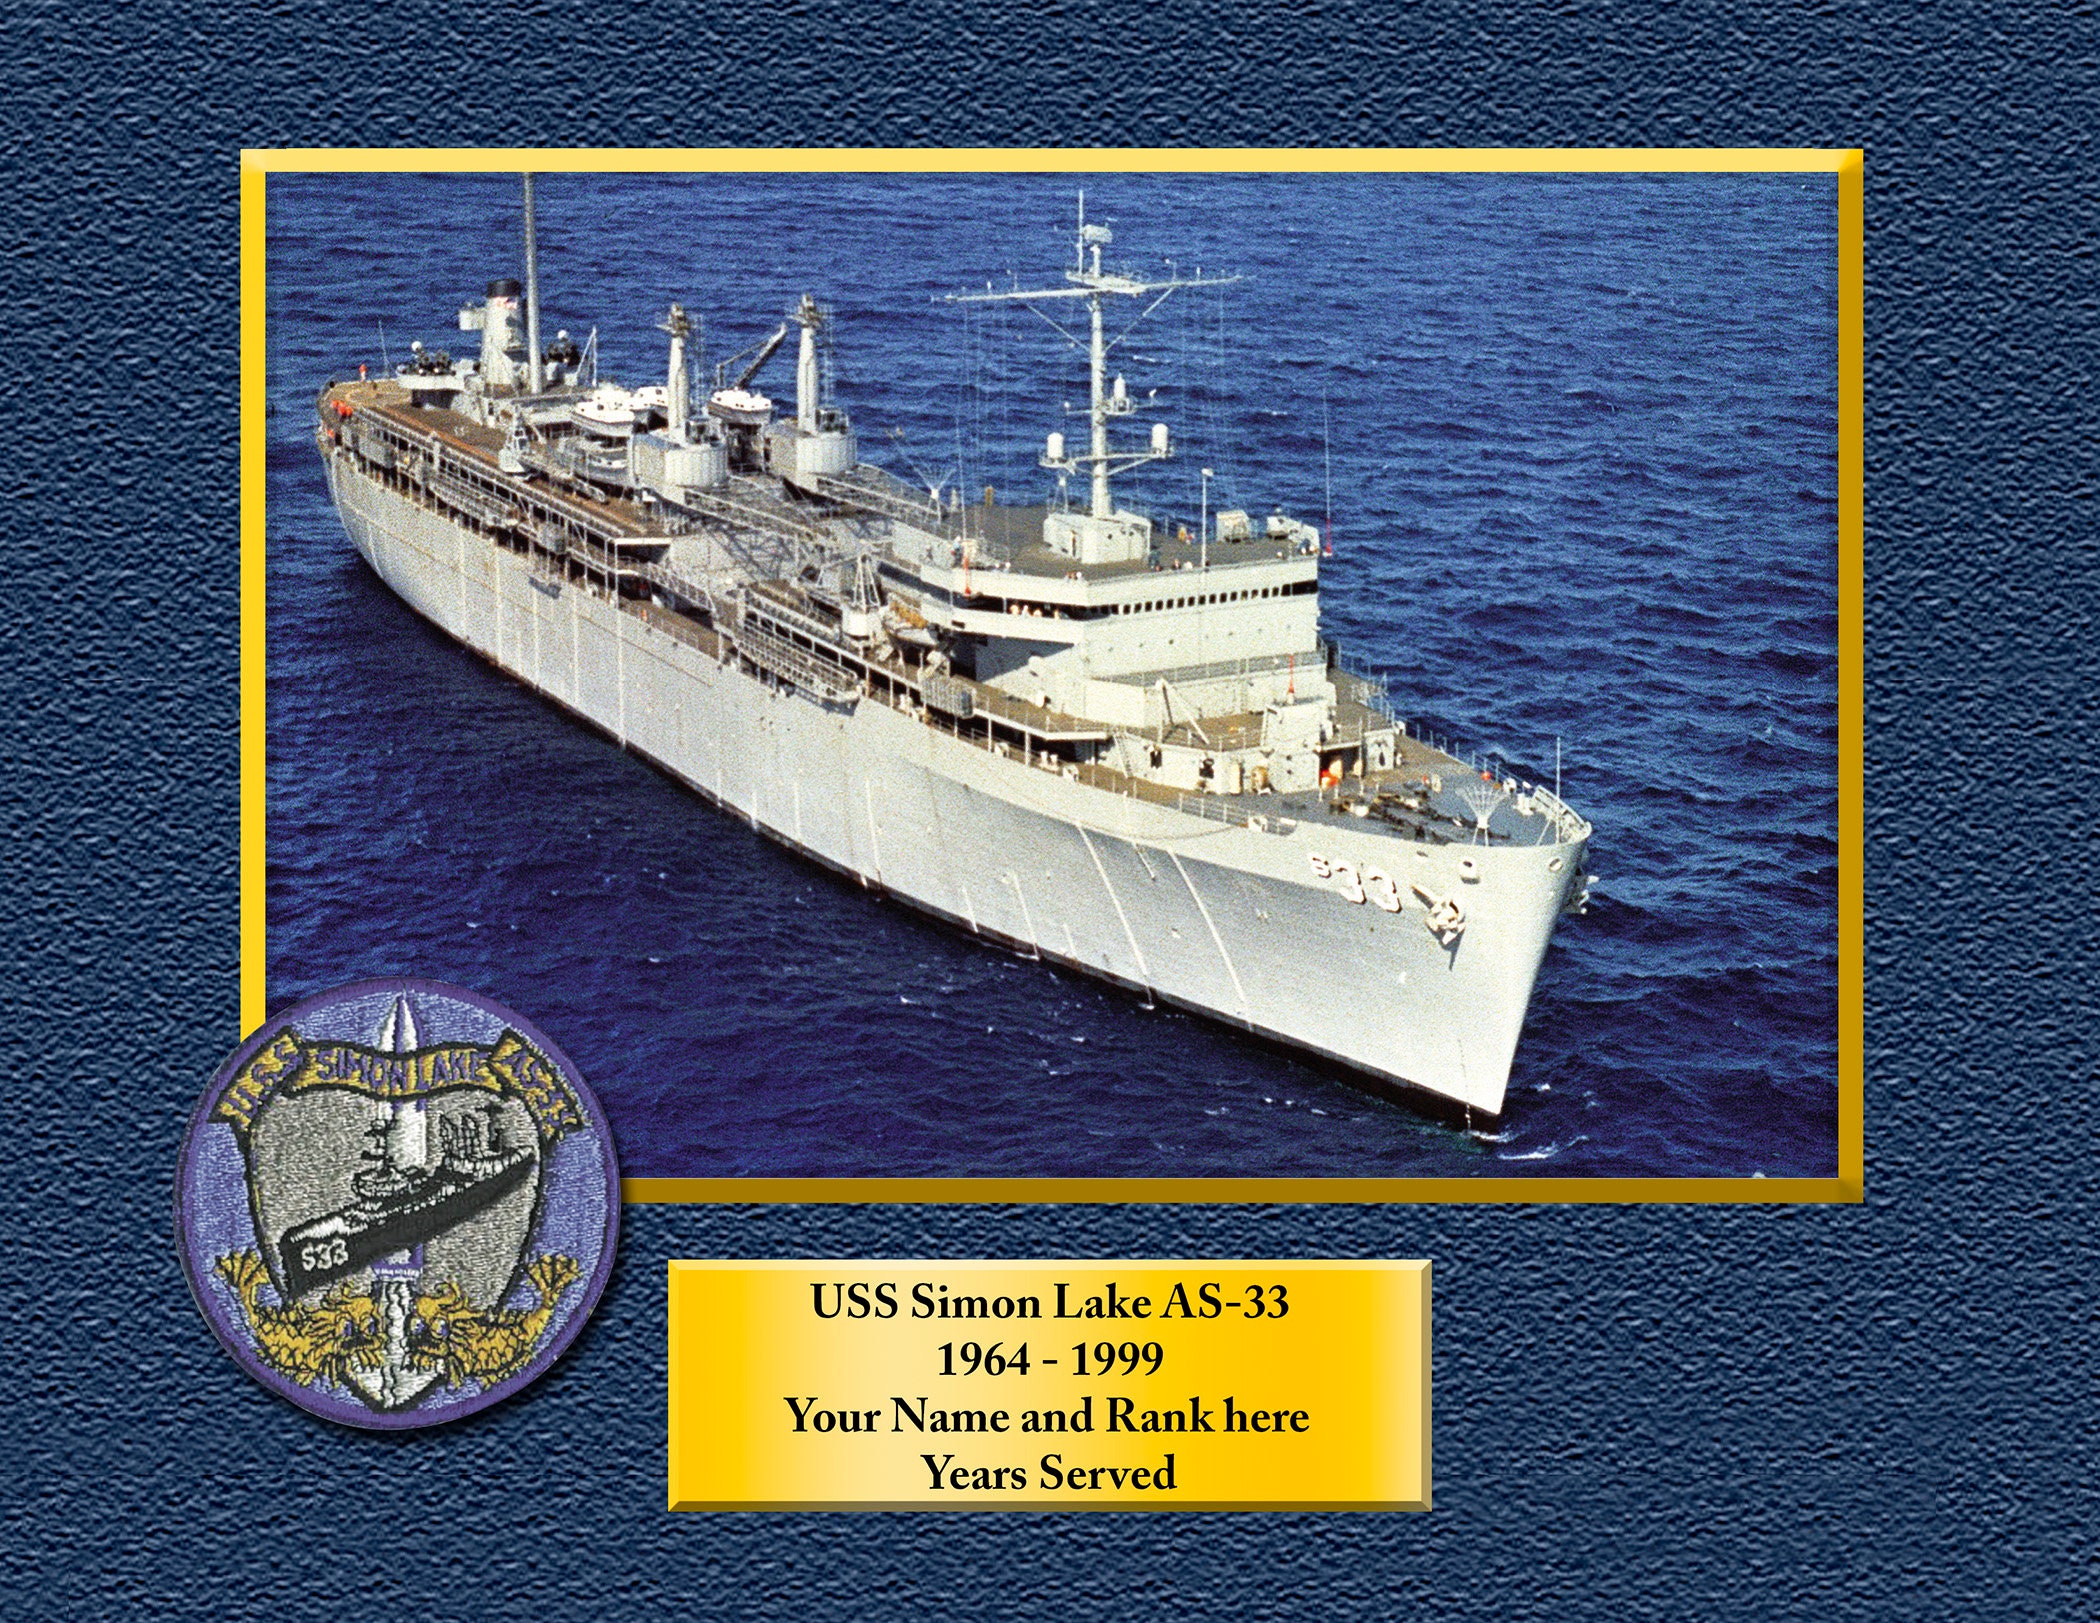 USS WILLIAM H STANDLEY DLG 32 Oval Decal Sticker Military USN U S Navy S05A 